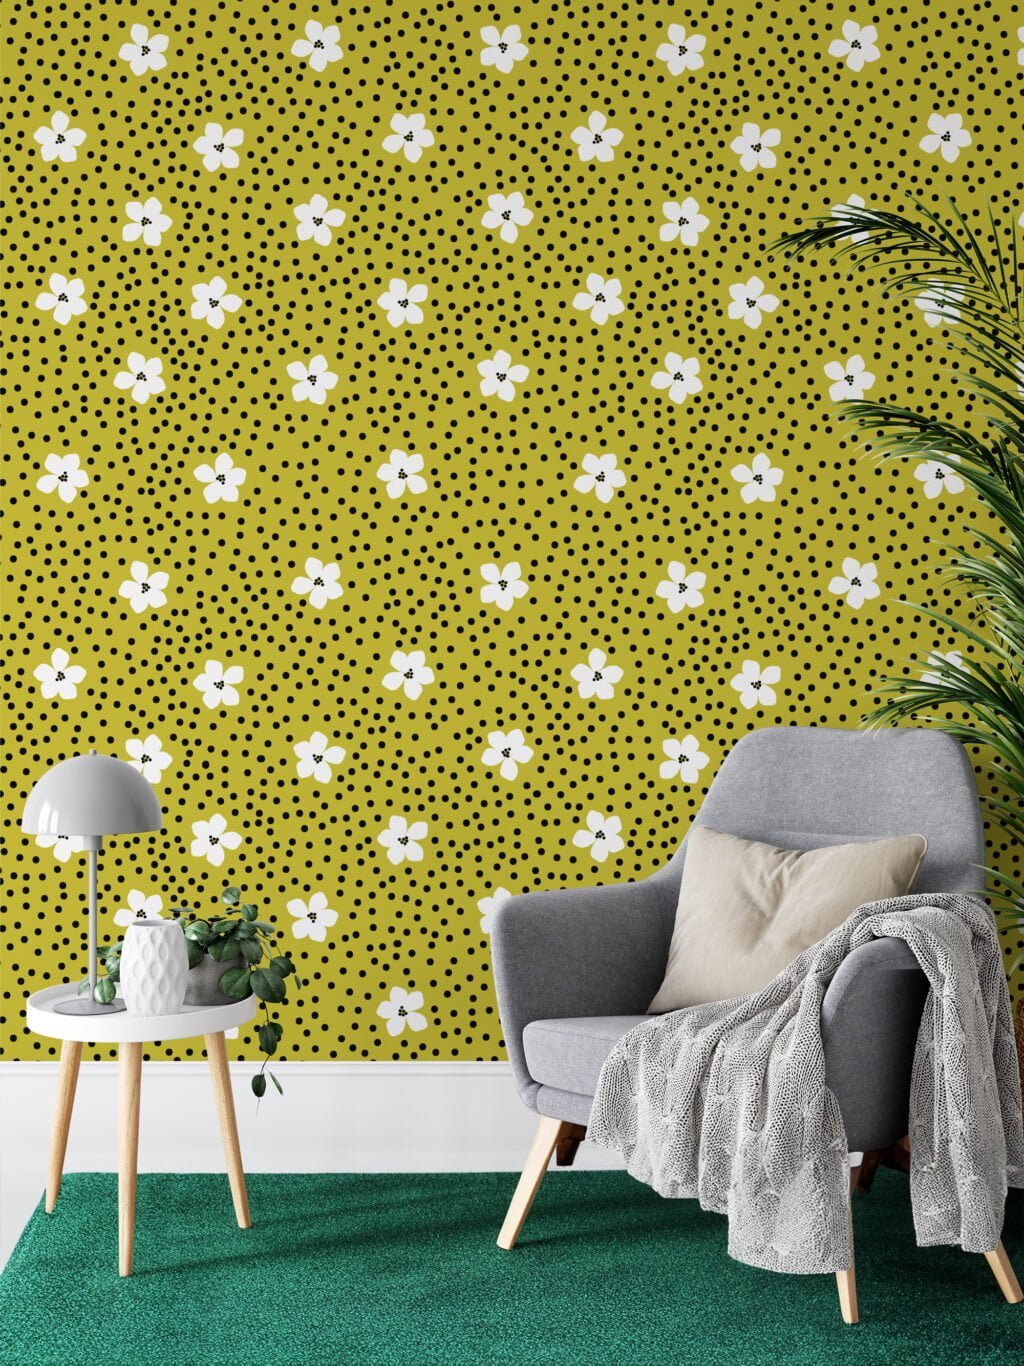 White Flowers With Dots Pattern Wallpaper, Vibrant Floral Design Peel & Stick Wall Mural